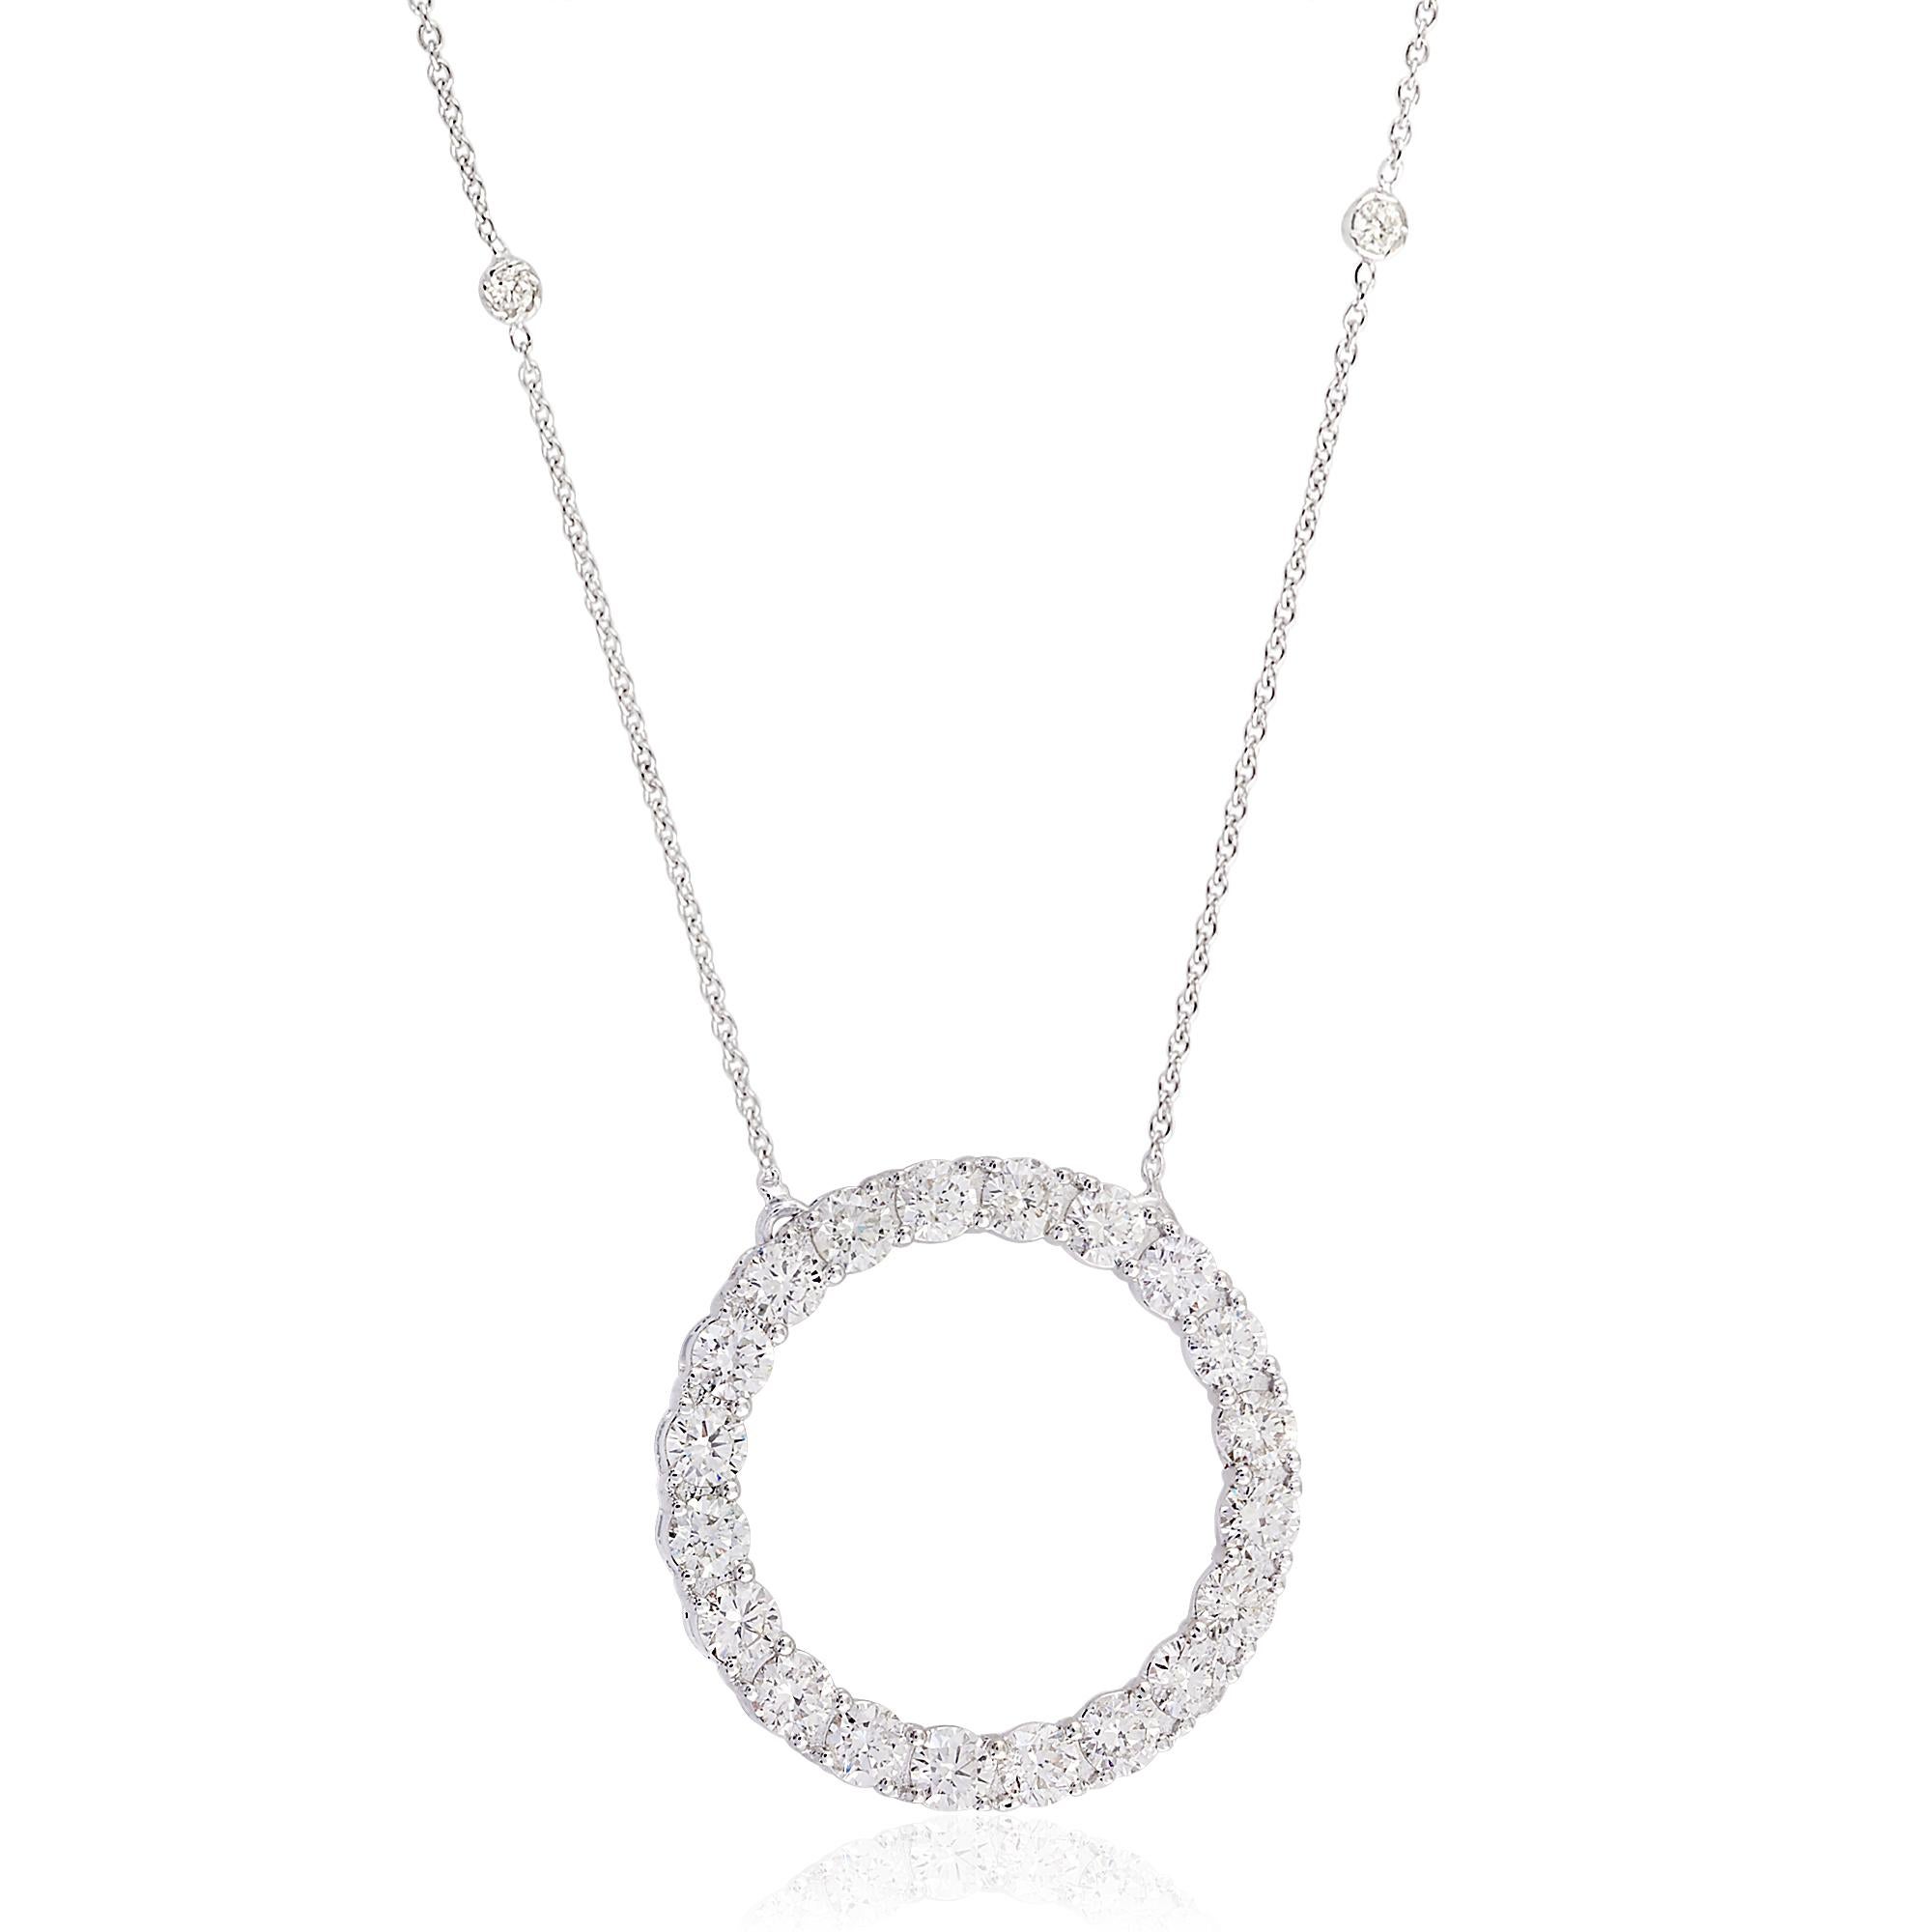 The focal point of this necklace is the captivating circle charm pendant, encrusted with a total of 2.30 carats of pave-set diamonds. The diamonds, meticulously chosen for their exceptional clarity and brilliance, create a stunning display of